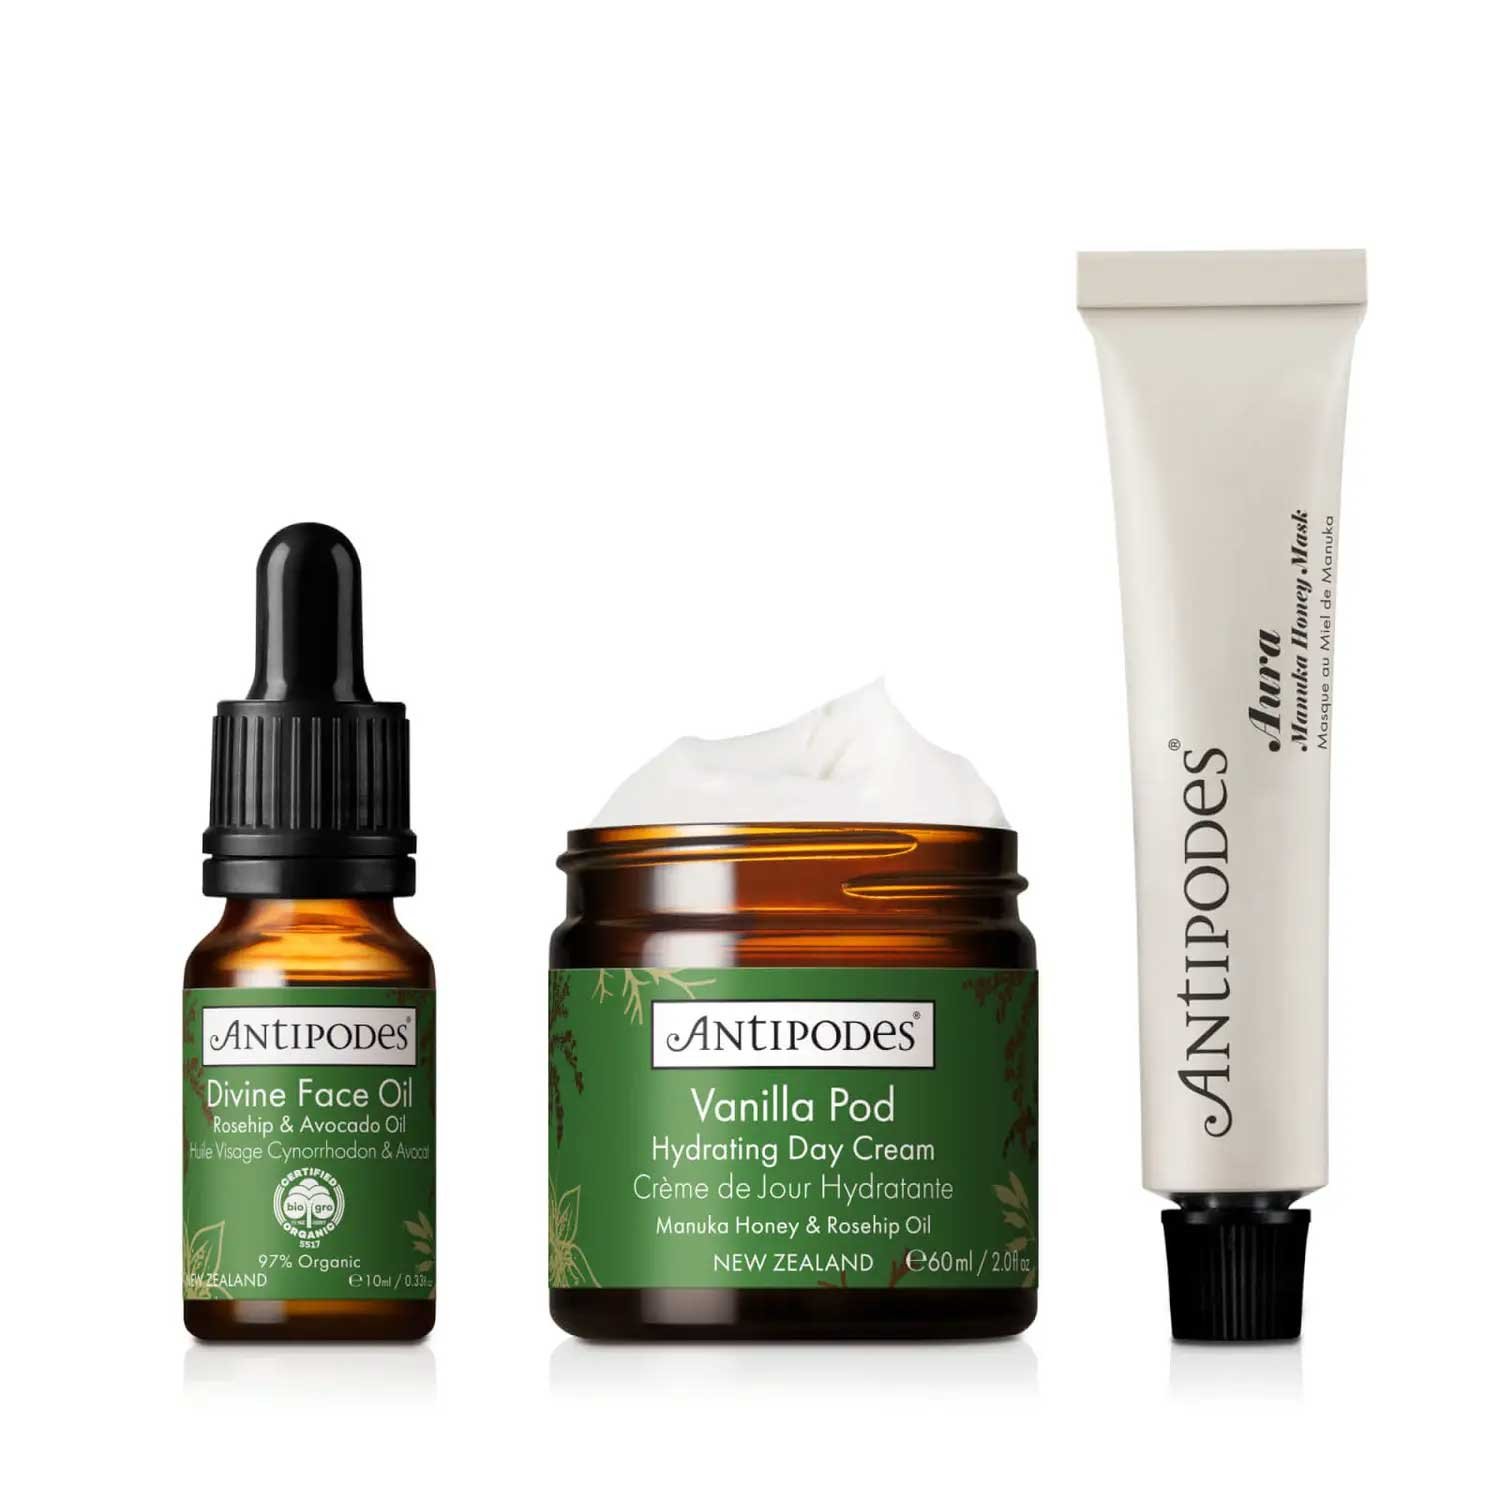 beauty gift sets for her under £50 affordable yet luxurious - Antipodes Ultimate Nourish Set: Nourishing the Women You Love beauty skincare gifts 